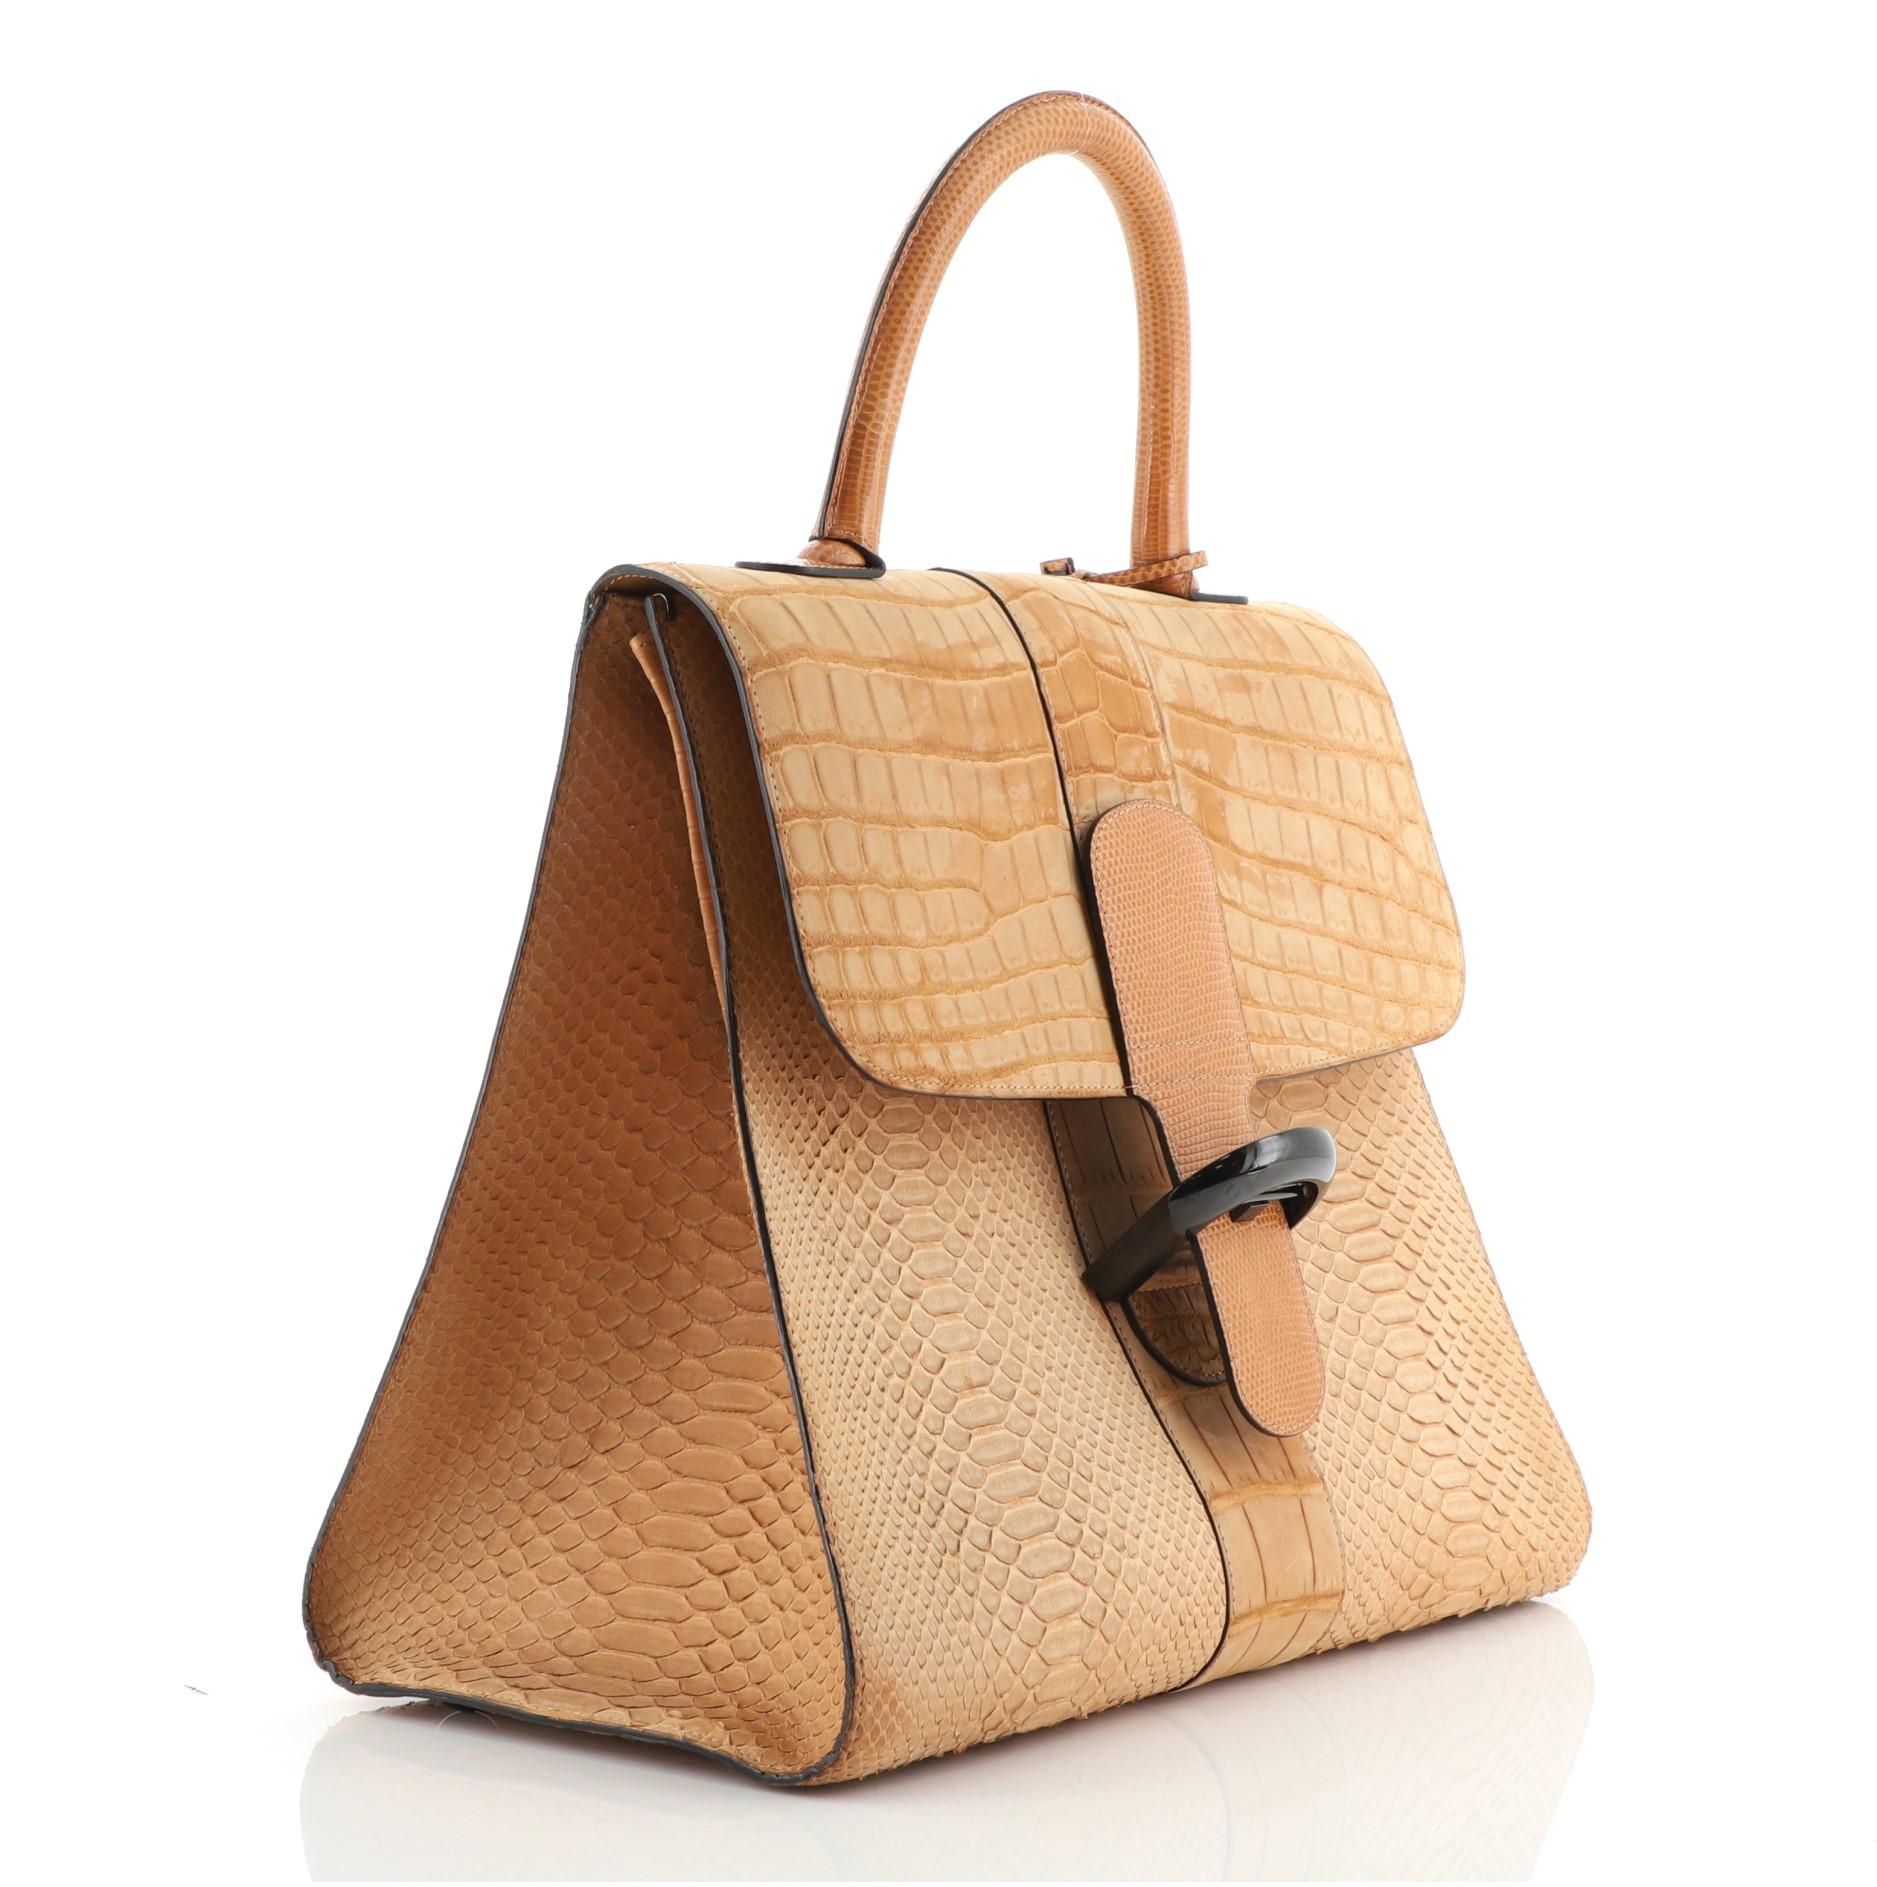 Delvaux Brillant Top Handle Bag Mixed Exotics GM
Brown

Condition Details: Moderate darkening on flap, scuffs on exterior and in interior, minor splitting on opening flap wax edges. Bubbling underneath flap, indentations in interior, scratches on